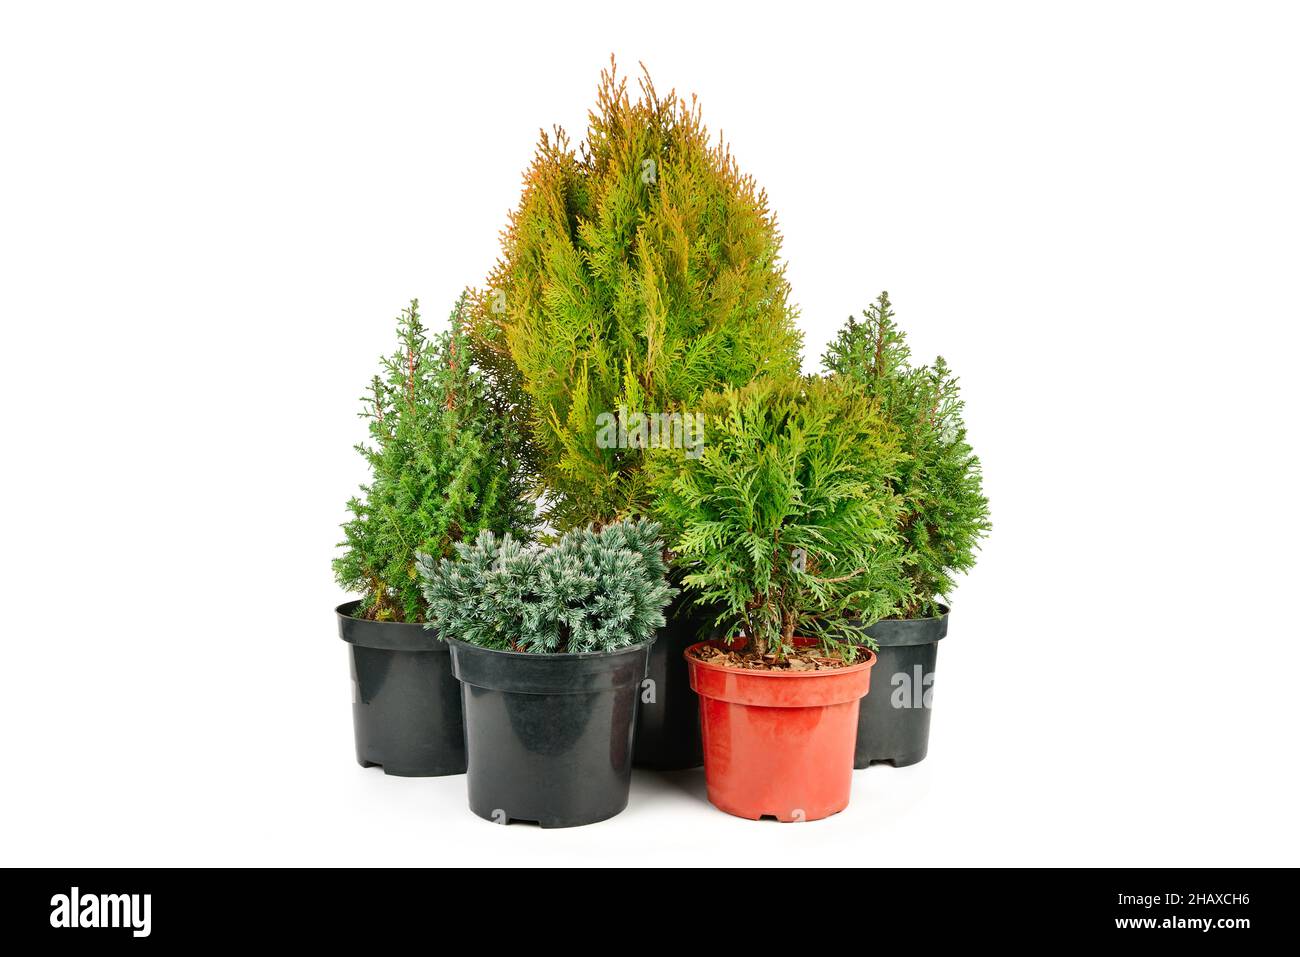 Juniper, cypress and thuja in flower pots isolated on white background. Stock Photo